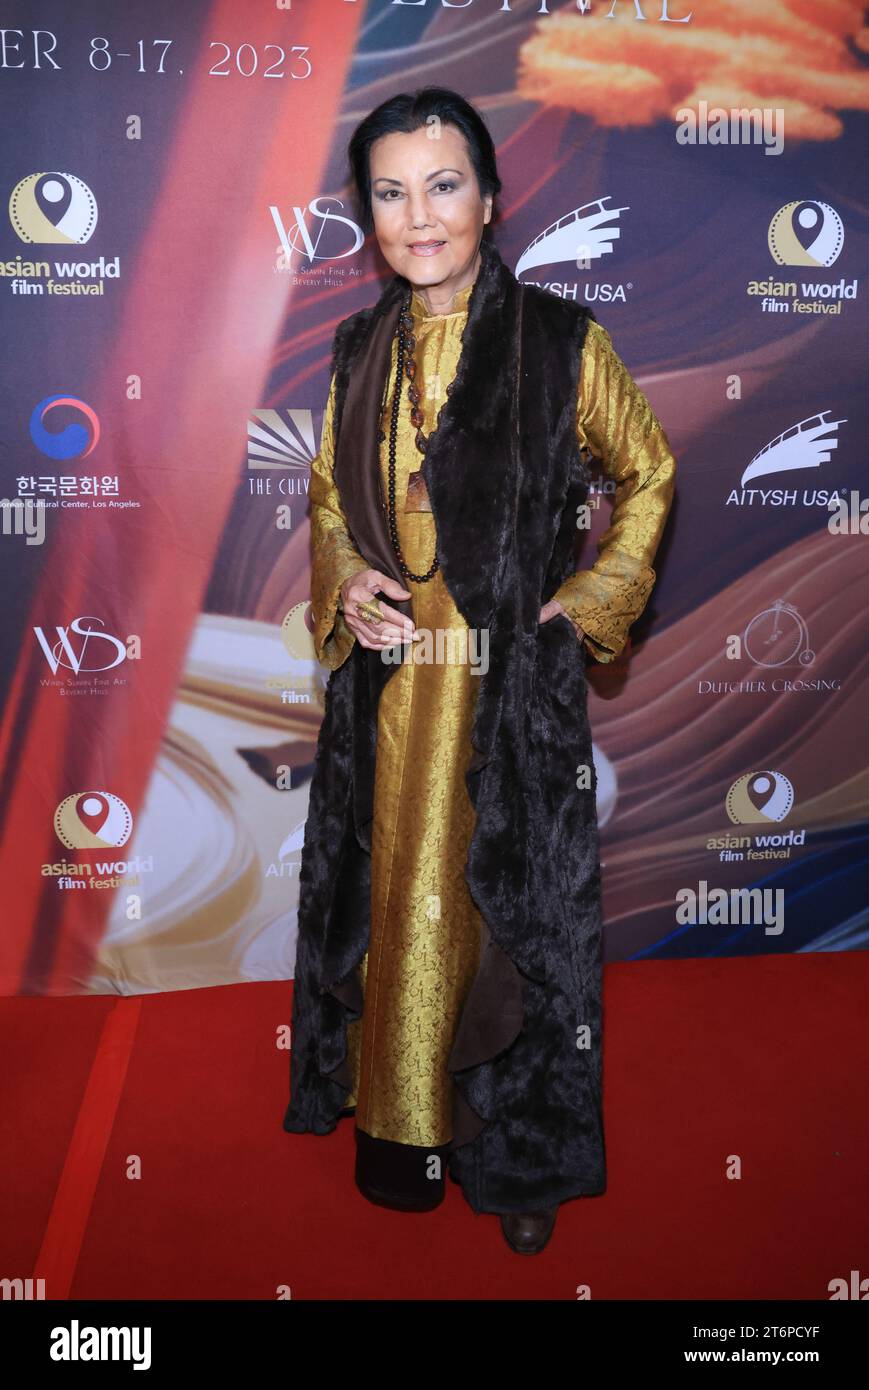 Culver City, California, USA. 8th November, 2023. Actress Kieu Chinh attending the 9th Annual Asian World Film Festival (AWFF) at the Culver Theatre in Culver City, California. Credit: Sheri Determan Stock Photo